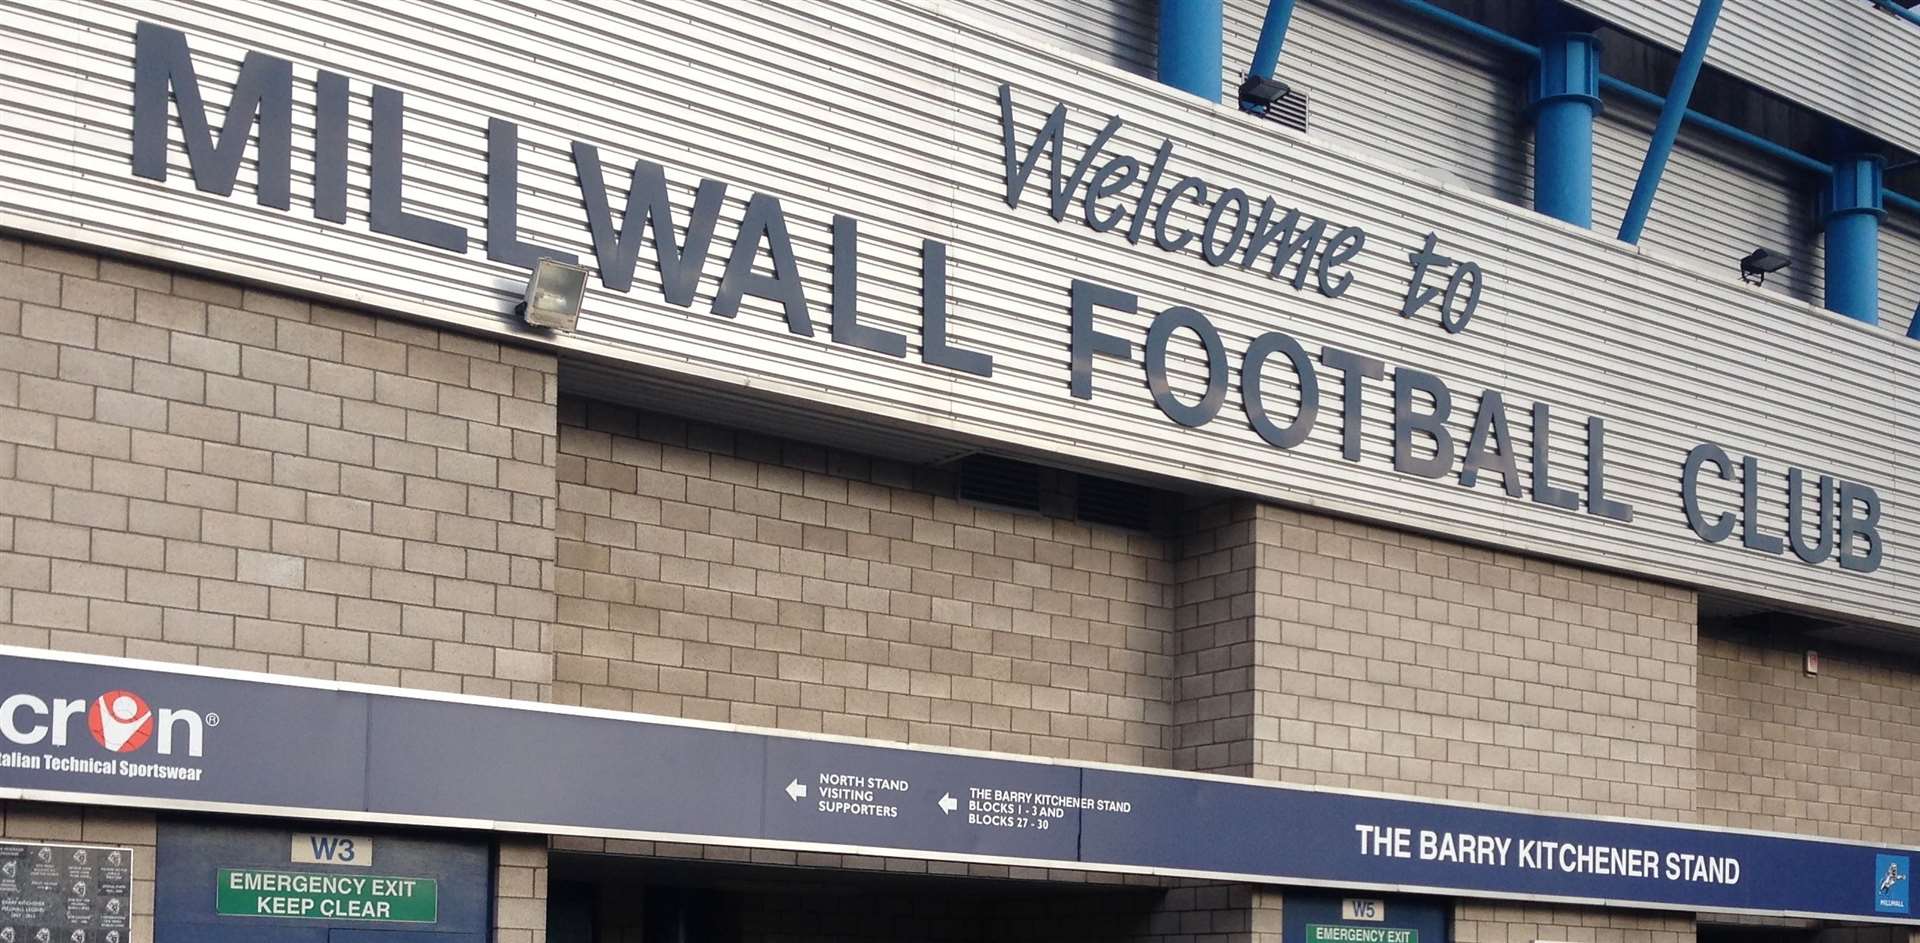 Millwall FC play in the Championship at the Den and currently train at facilities in Bromley.